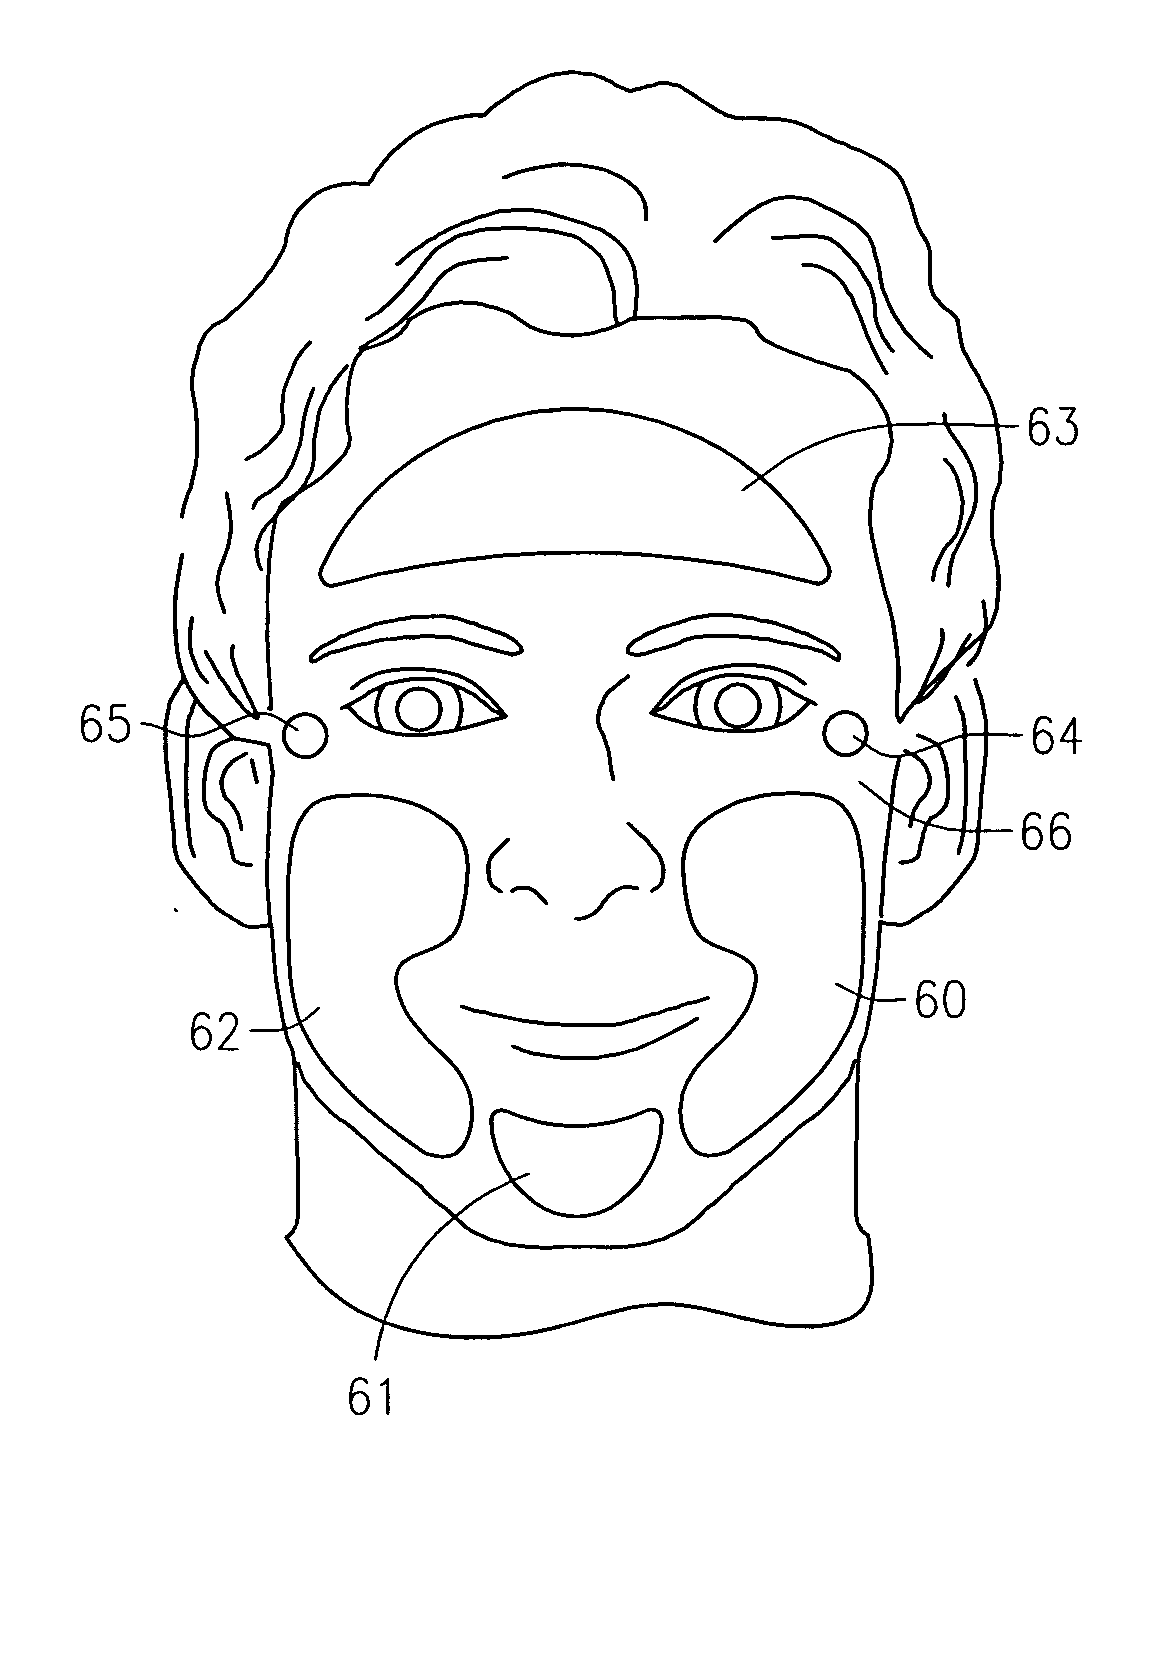 Device and method for treatment of external surfaces of a body utilizing a light-emitting container